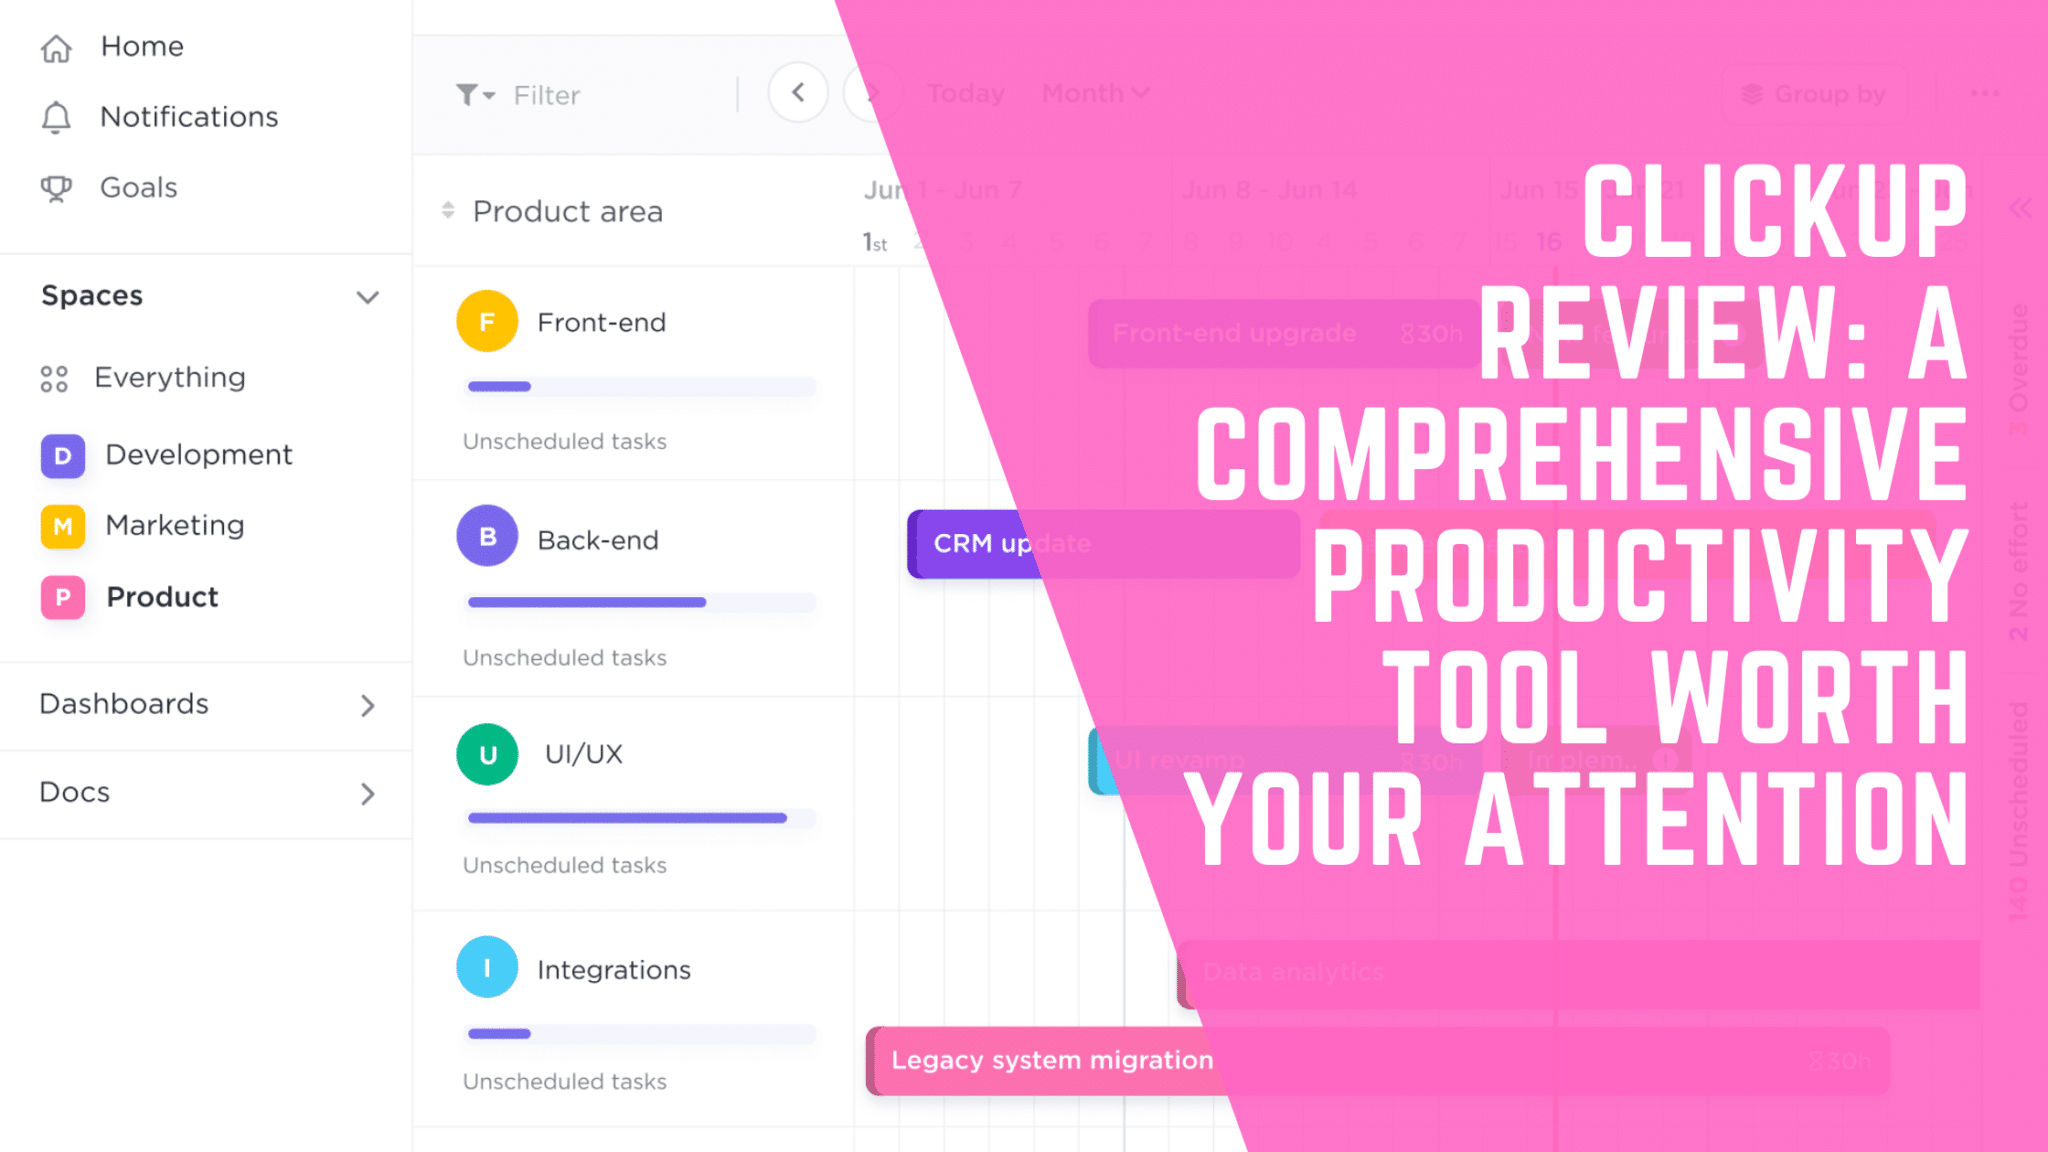 ClickUp Review A Comprehensive Productivity Tool Worth Your Attention